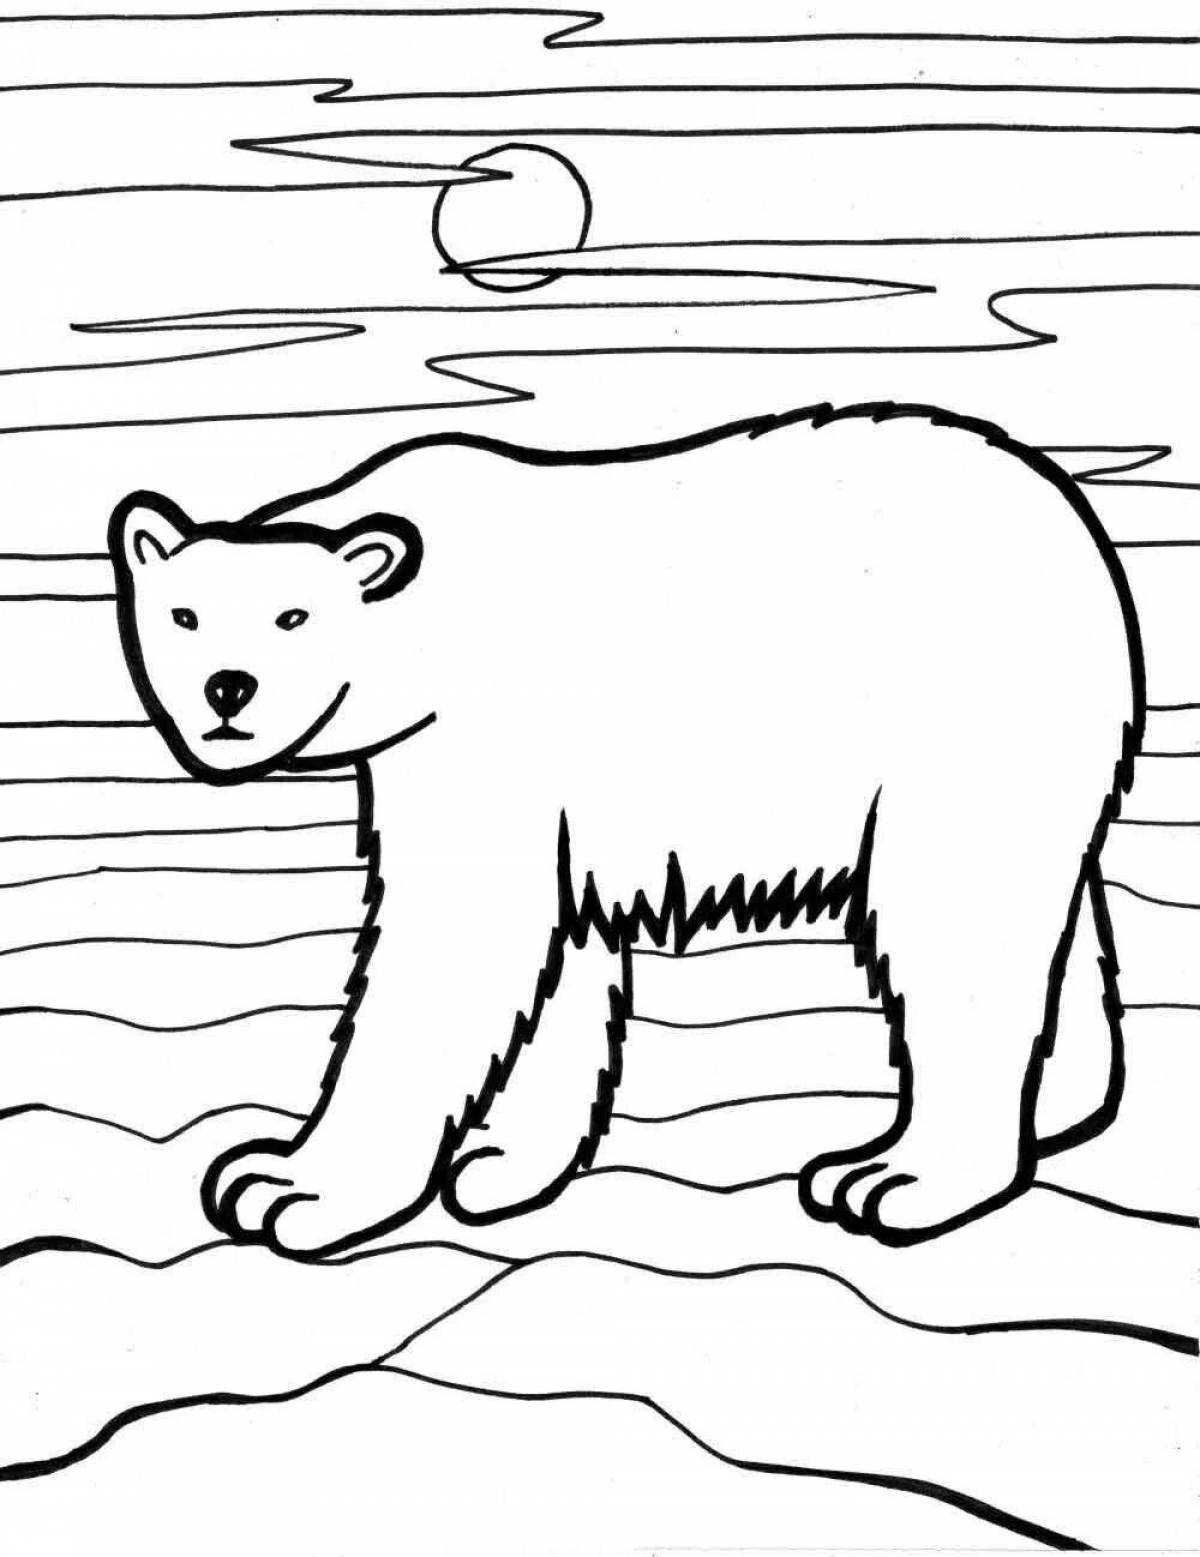 Exquisite northern lights coloring book for kids